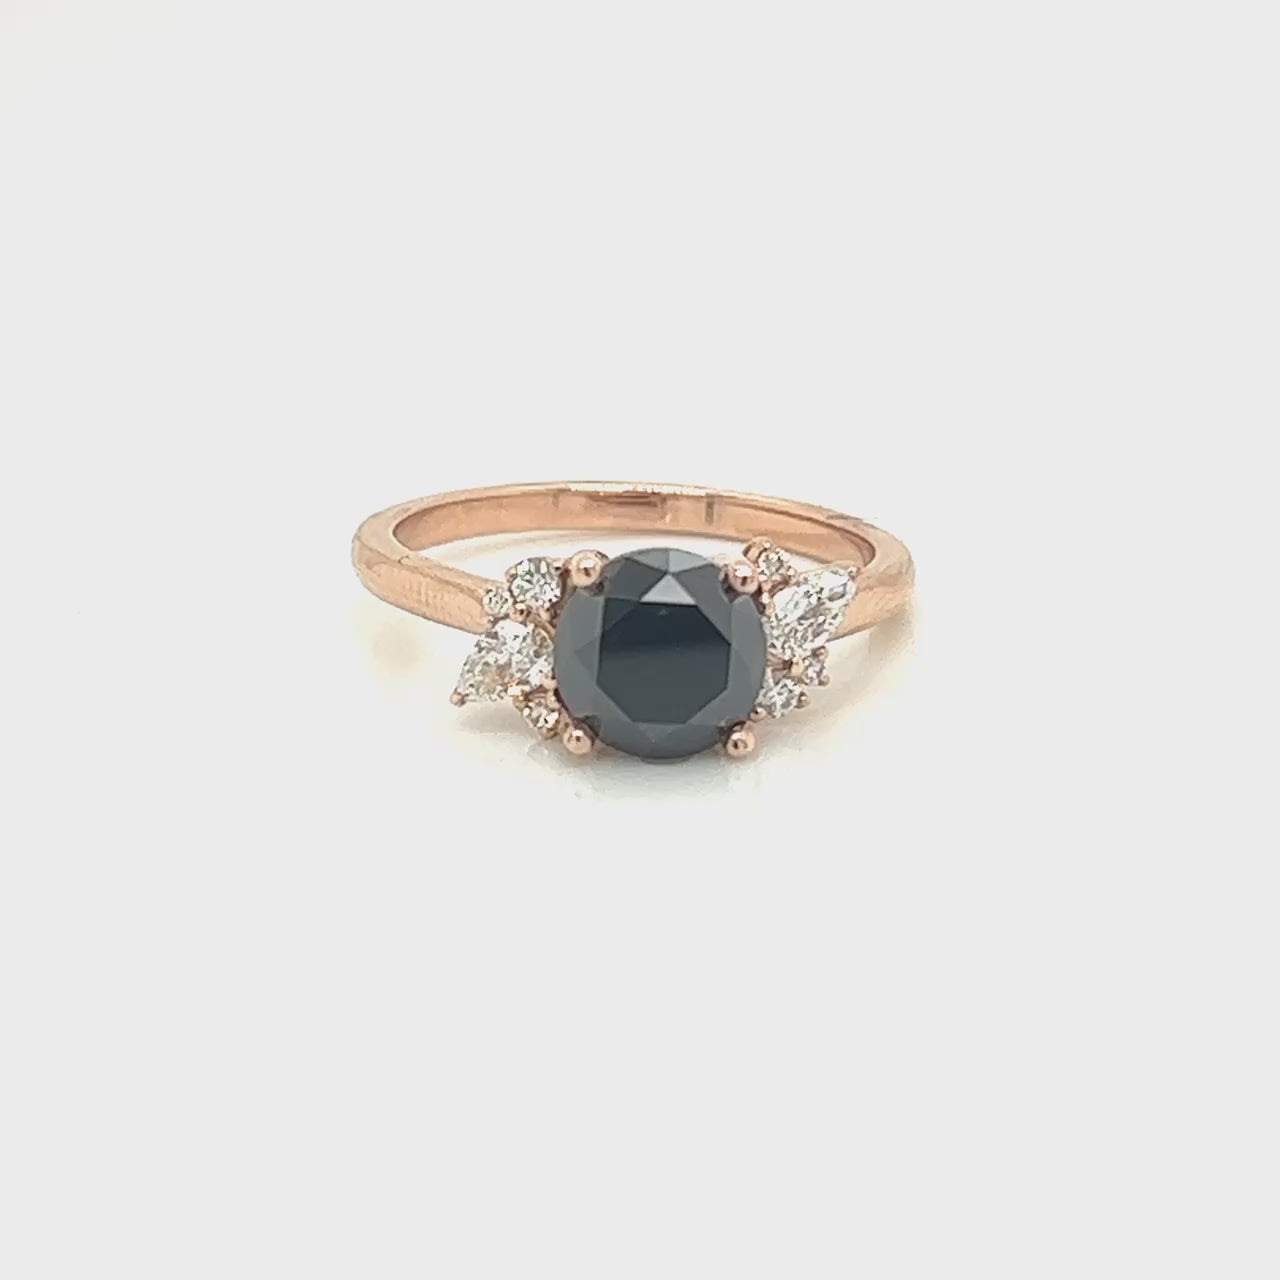 Sable Ring with a 2.20 Carat Round Black Celestial Diamond and White Accent Diamonds in 14k Rose Gold - Ready to Size and Ship